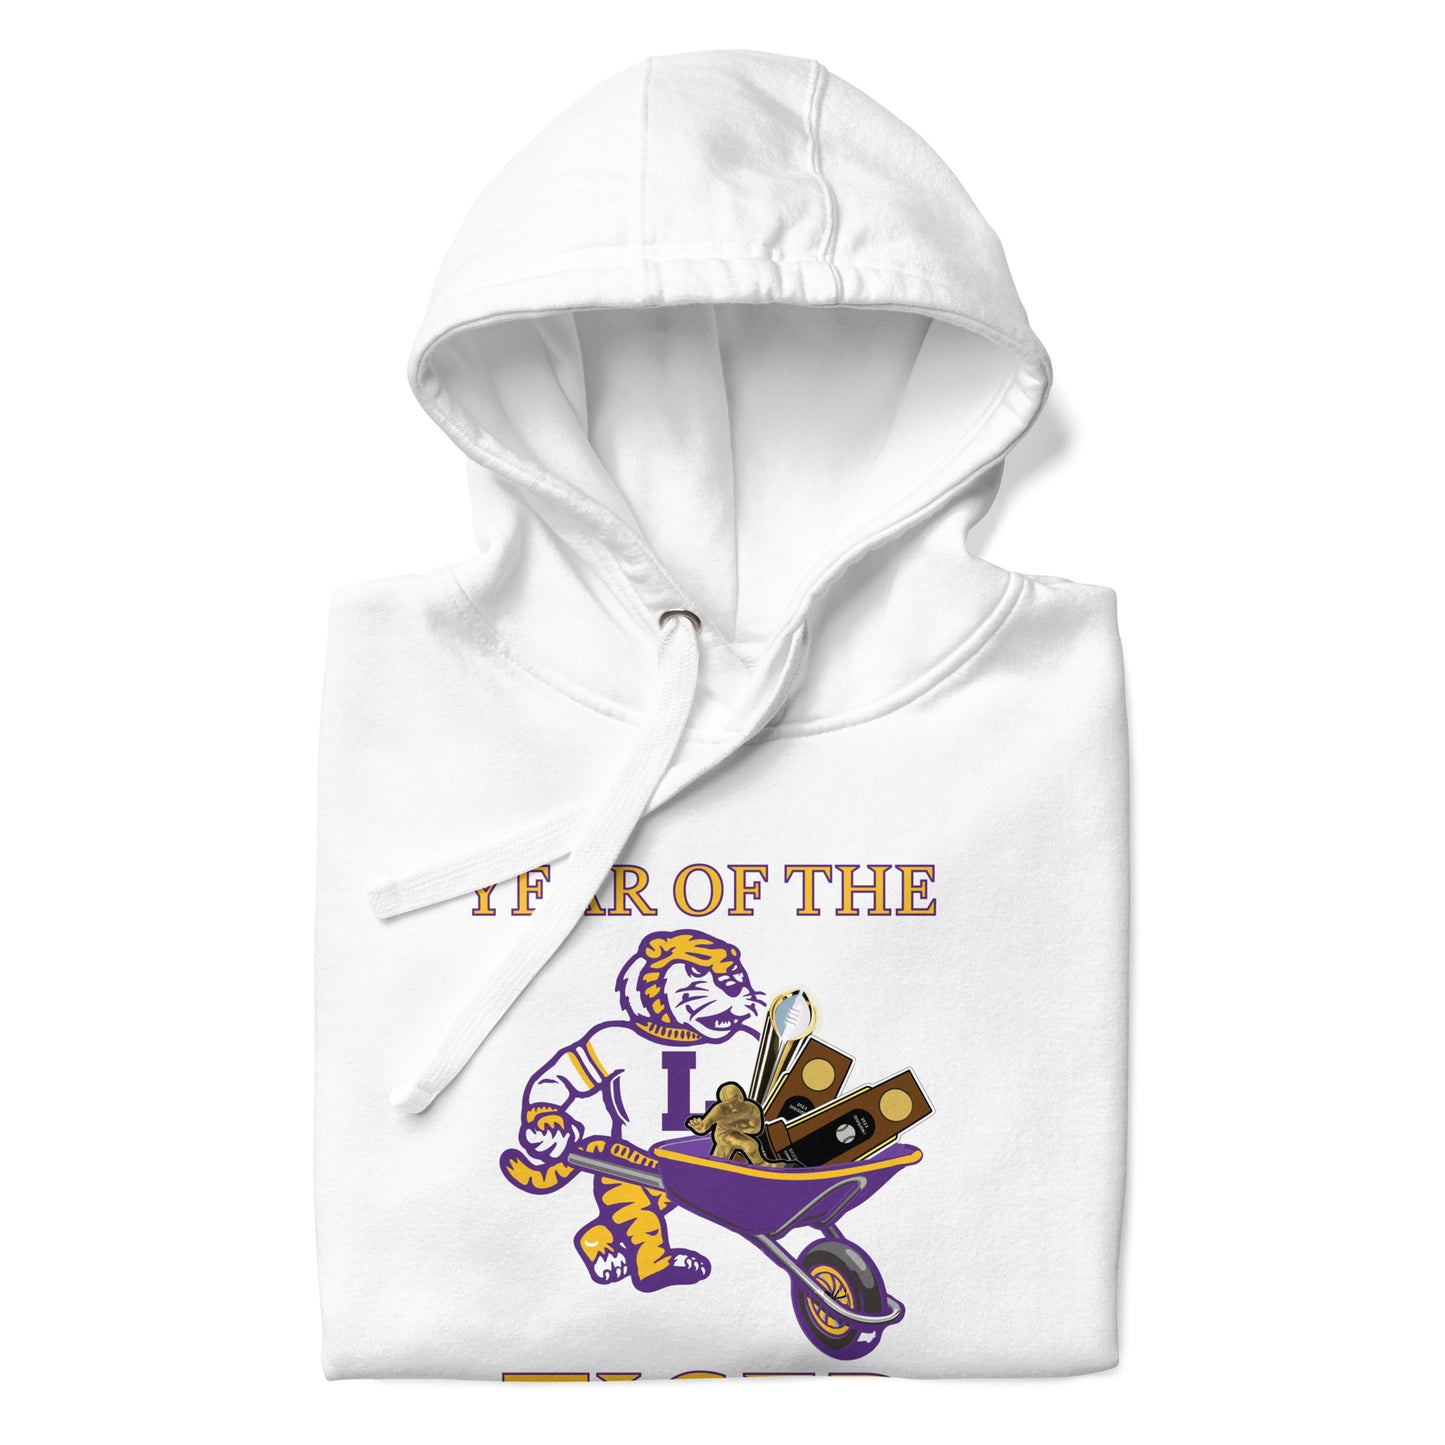 YEAR OF THE TIGER W TROPHY MIKE - FRONT - Unisex Hoodie